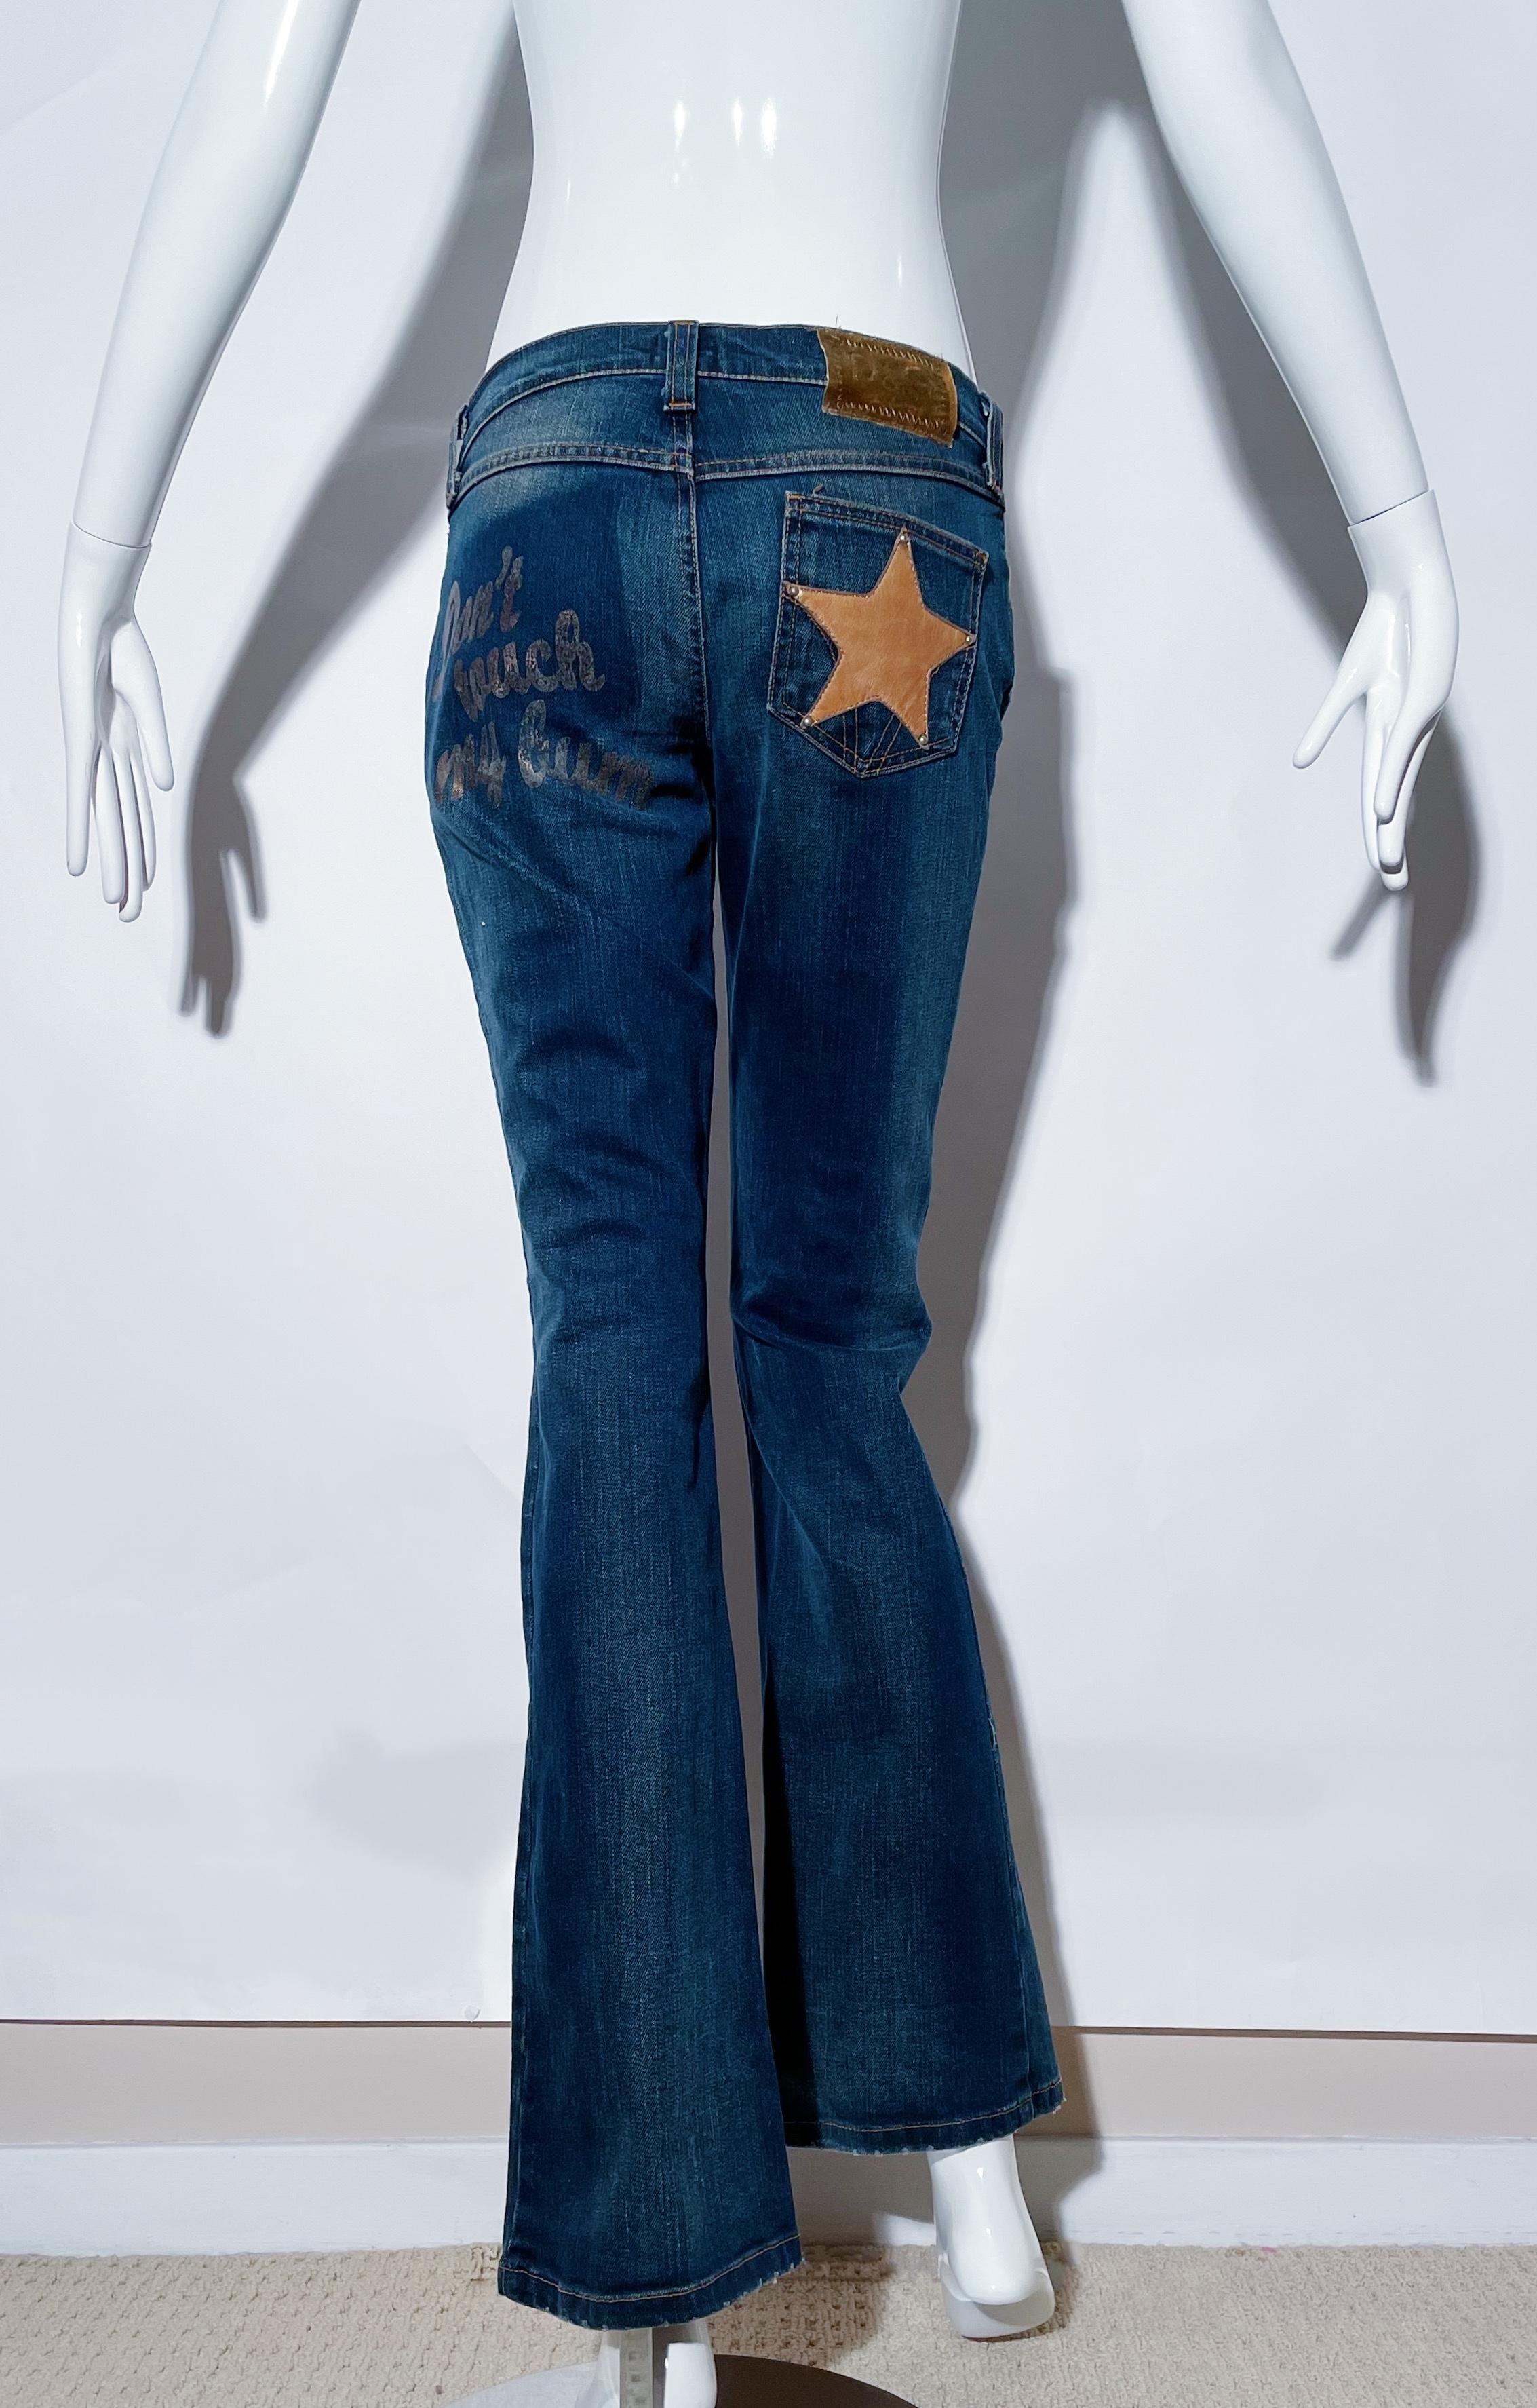 D & G denim jeans. “Don’t touch my bum” on rear. Leather star and front trim on pockets. Low rise. Front zipper closure. Cotton. Made in Italy. 
*Condition: excellent vintage condition. No visible flaws.

Measurements Taken Laying Flat